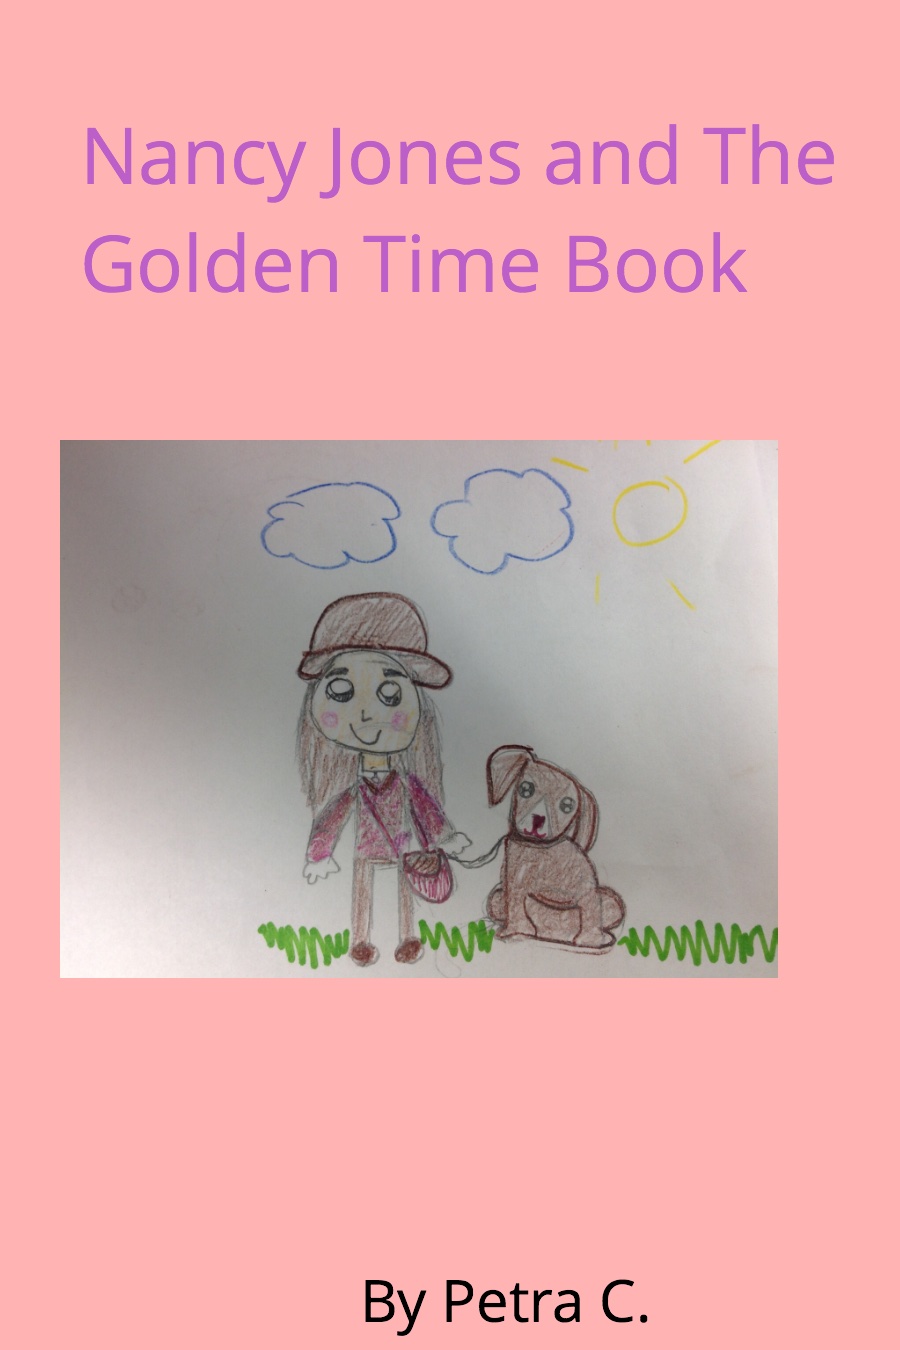 Nancy Jones And The Golden Time Book by Petra C